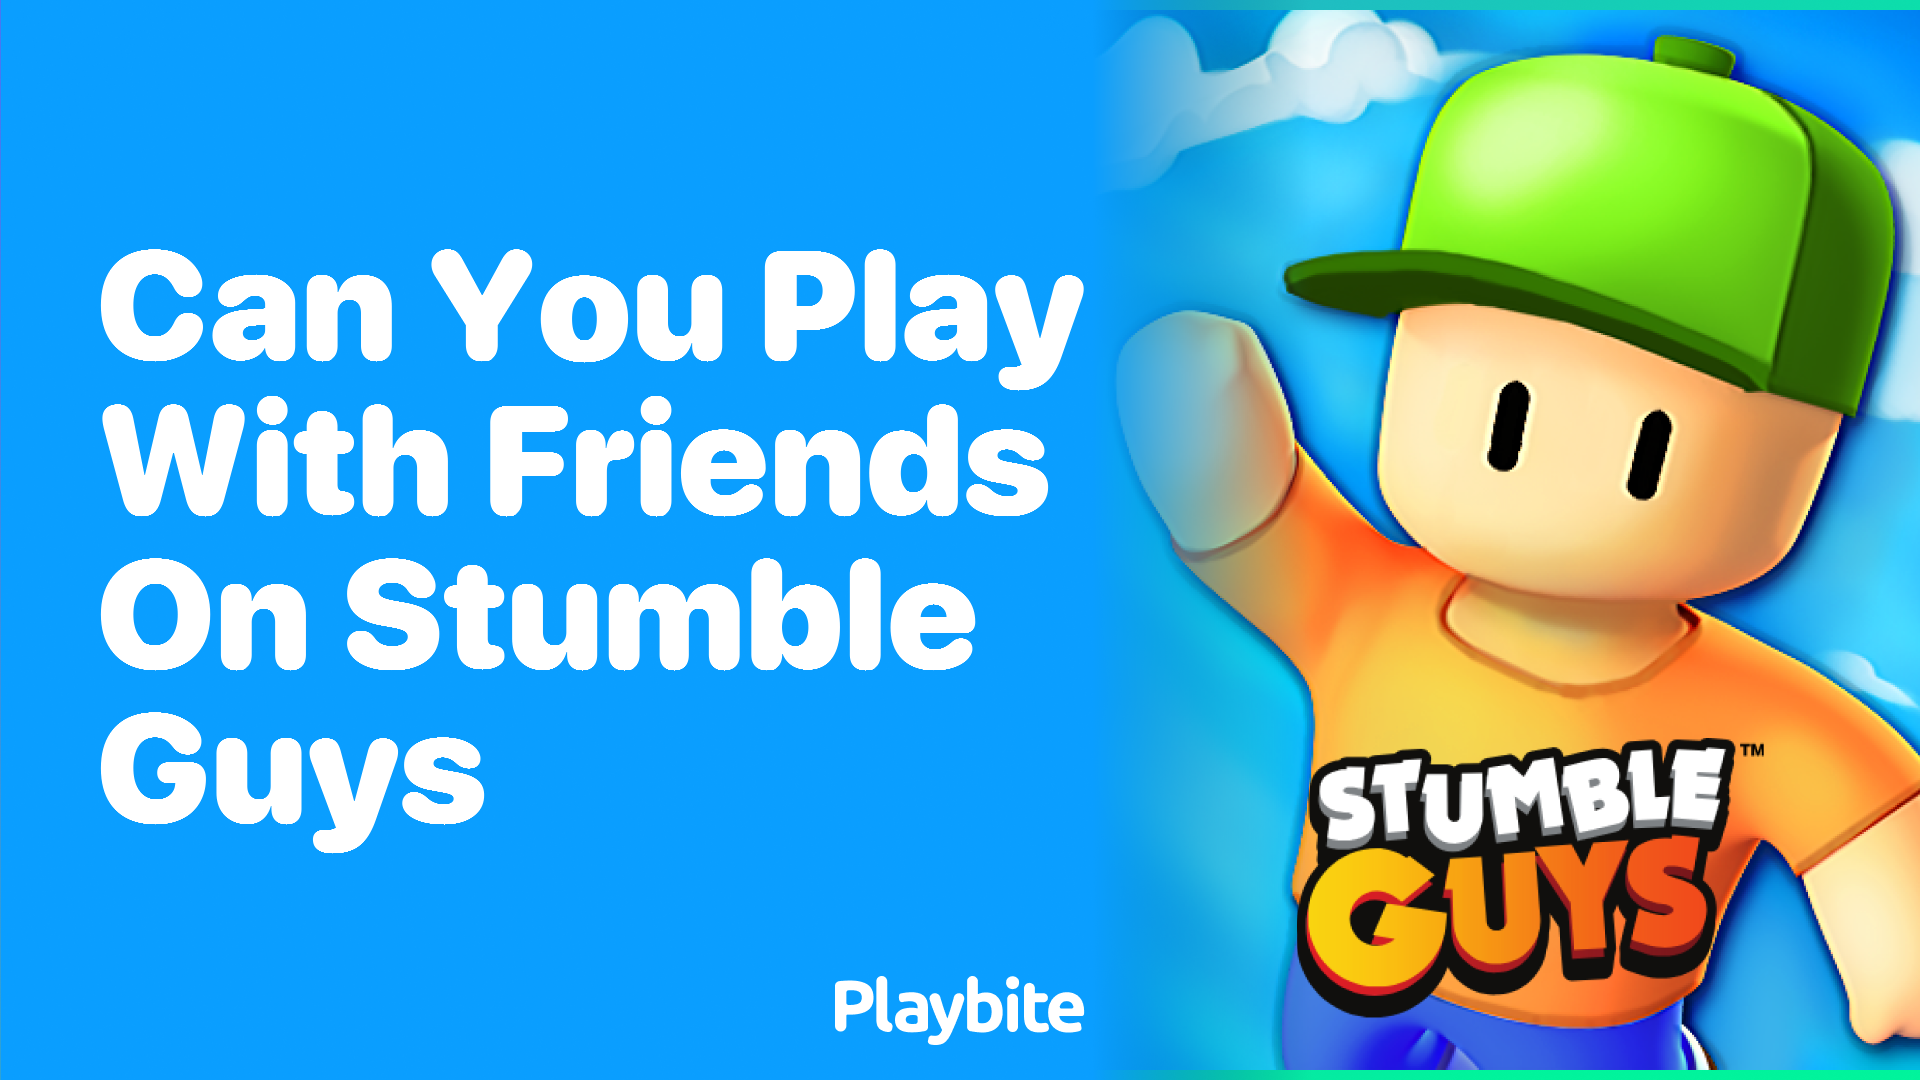 Can You Play with Friends on Stumble Guys?